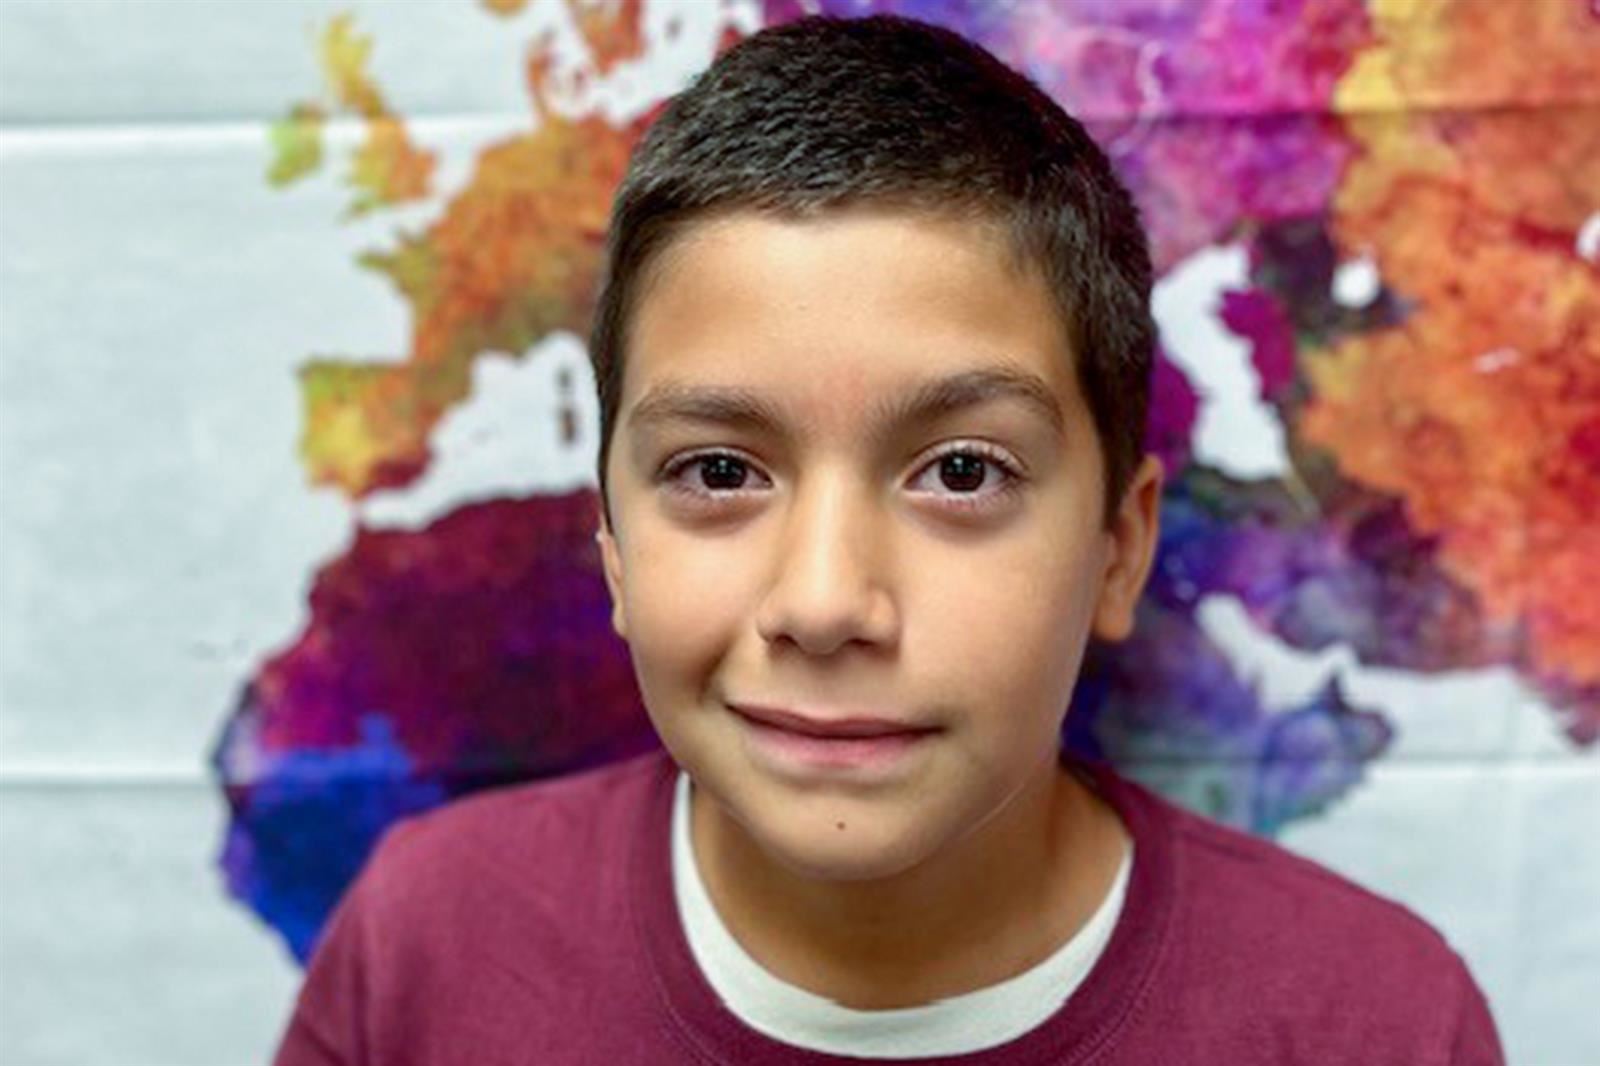 Birkes fifth grade student Andres Muñoz is credited by his teacher for being a leader.